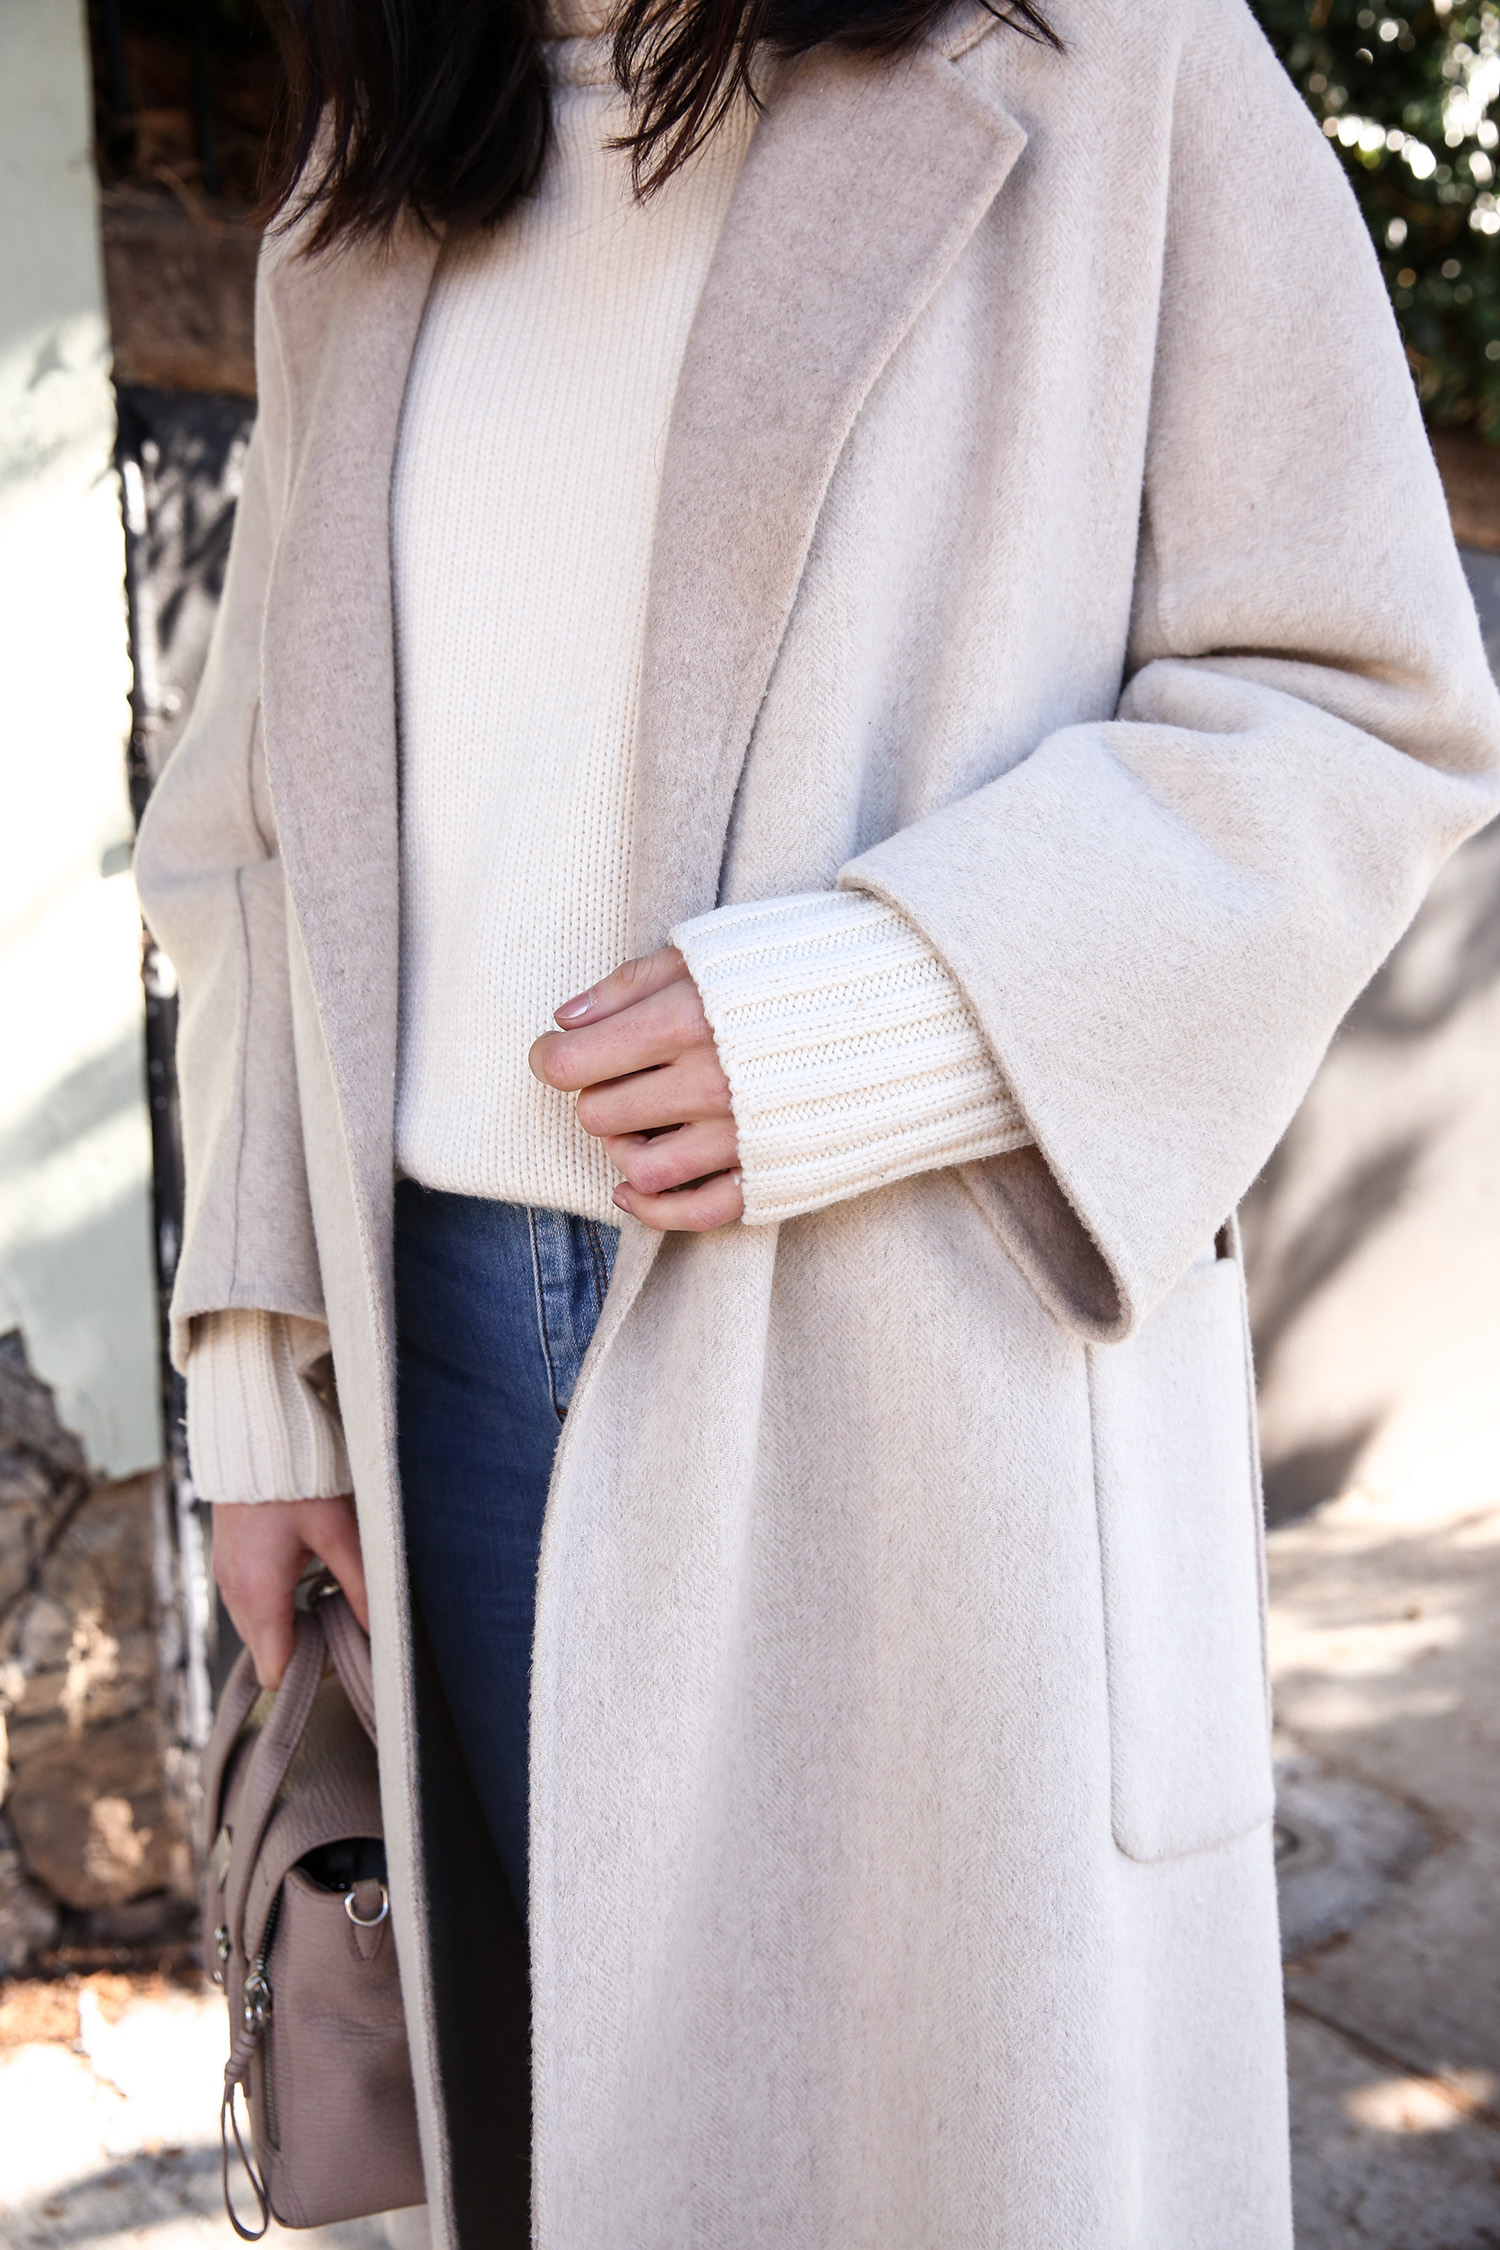 Scandi style outfit wearing white rollneck sweater skinny jeans and a duster coat